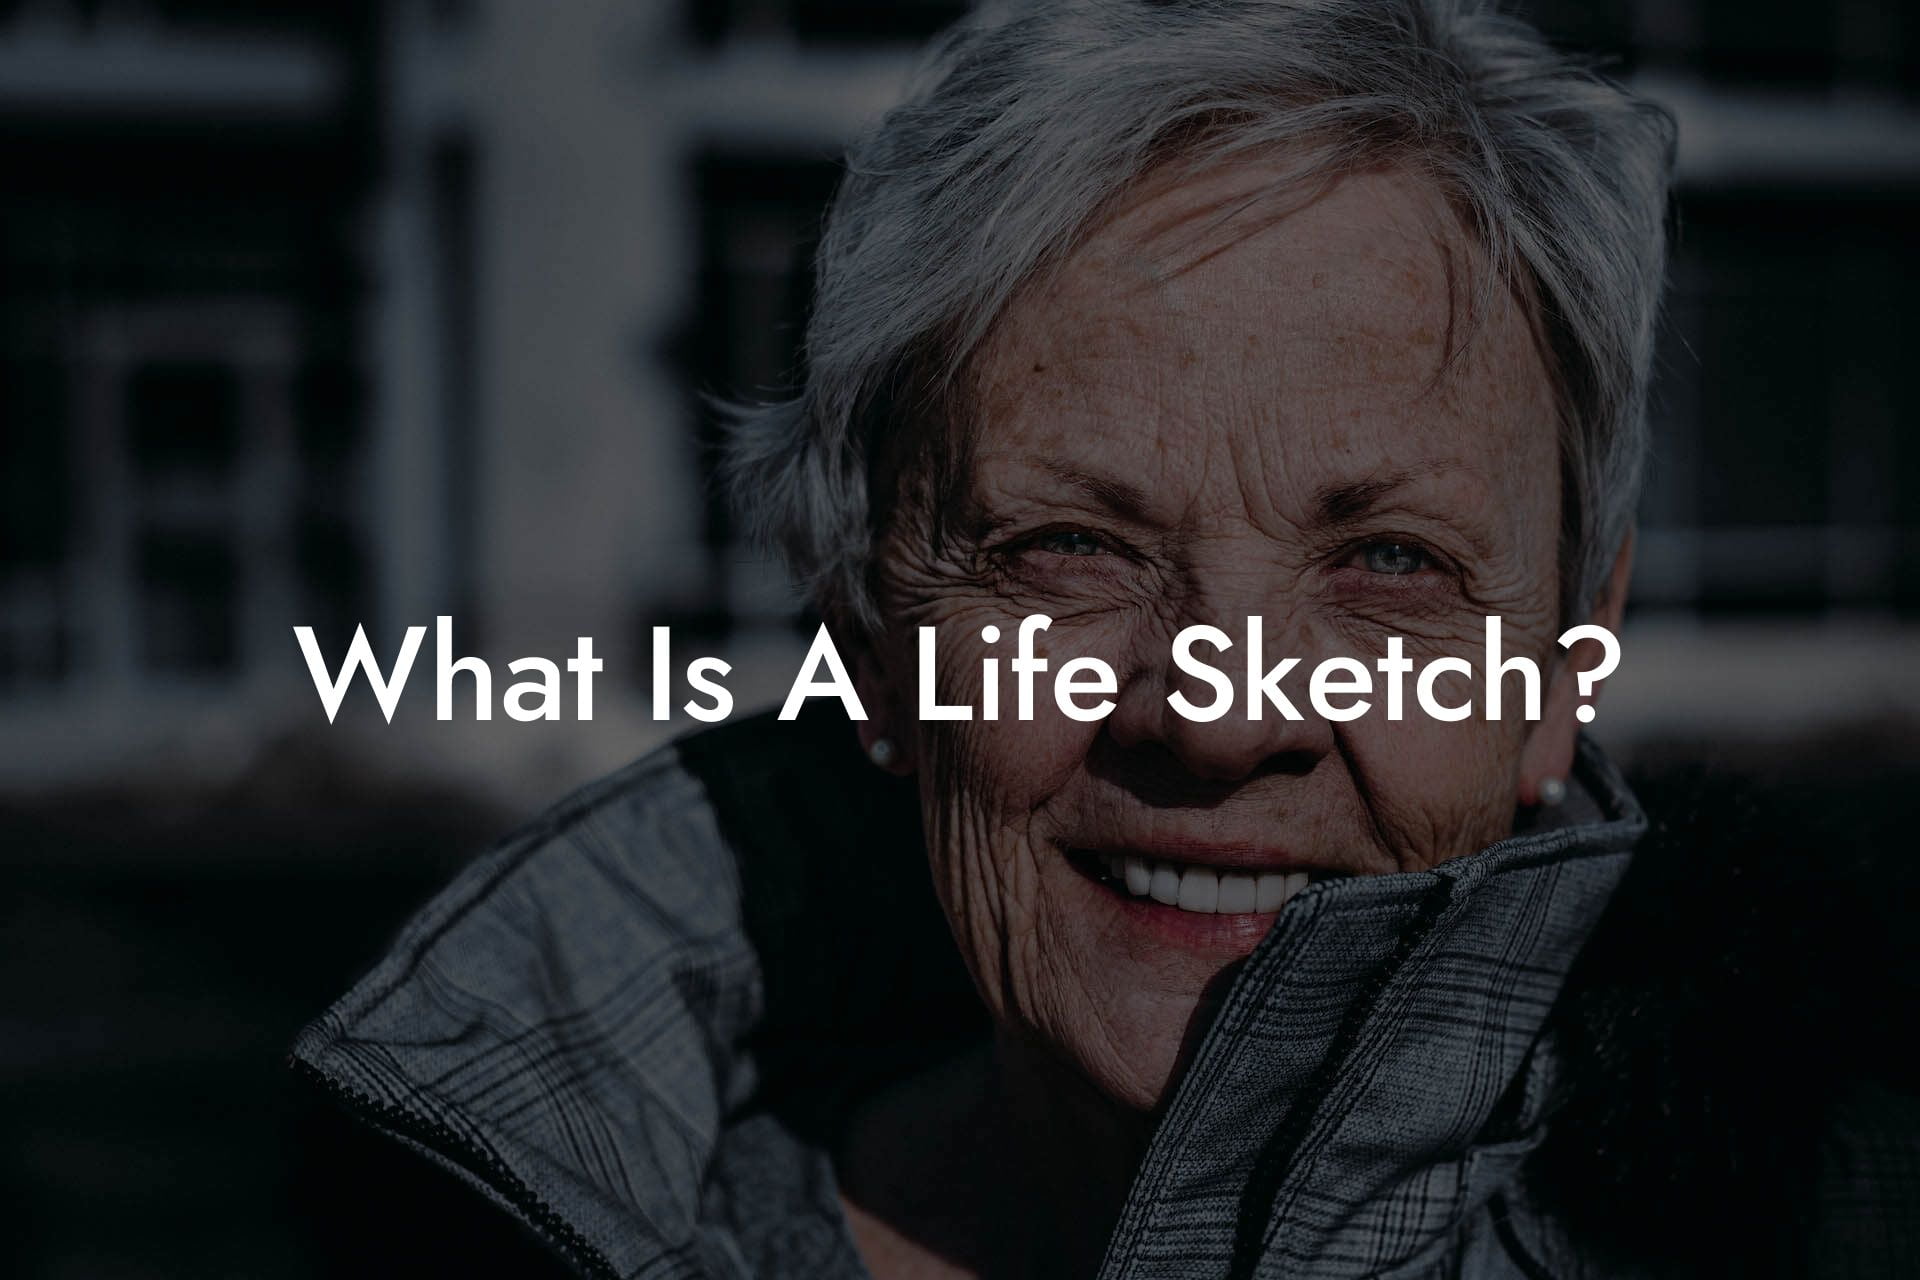 What Is A Life Sketch?